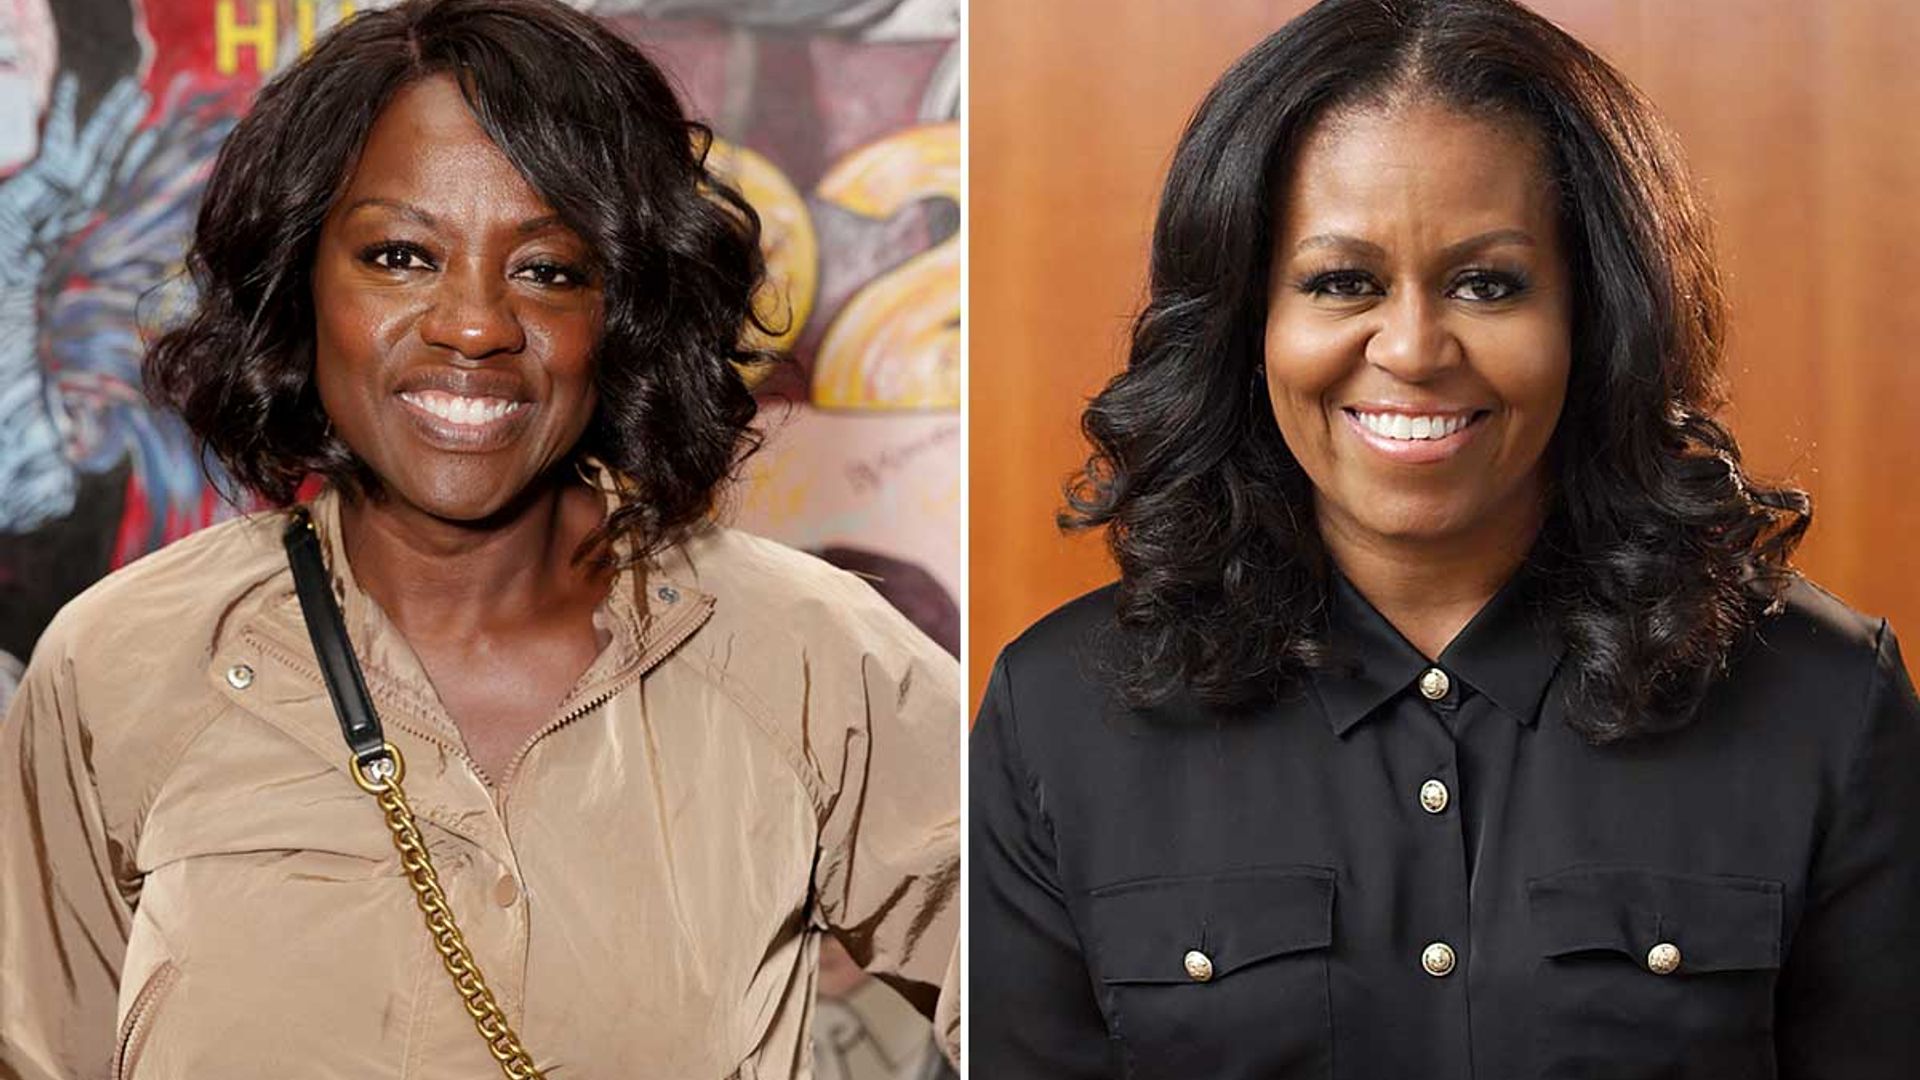 Viola Davis stuns fans with Michelle Obama transformation in first look at The First Lady